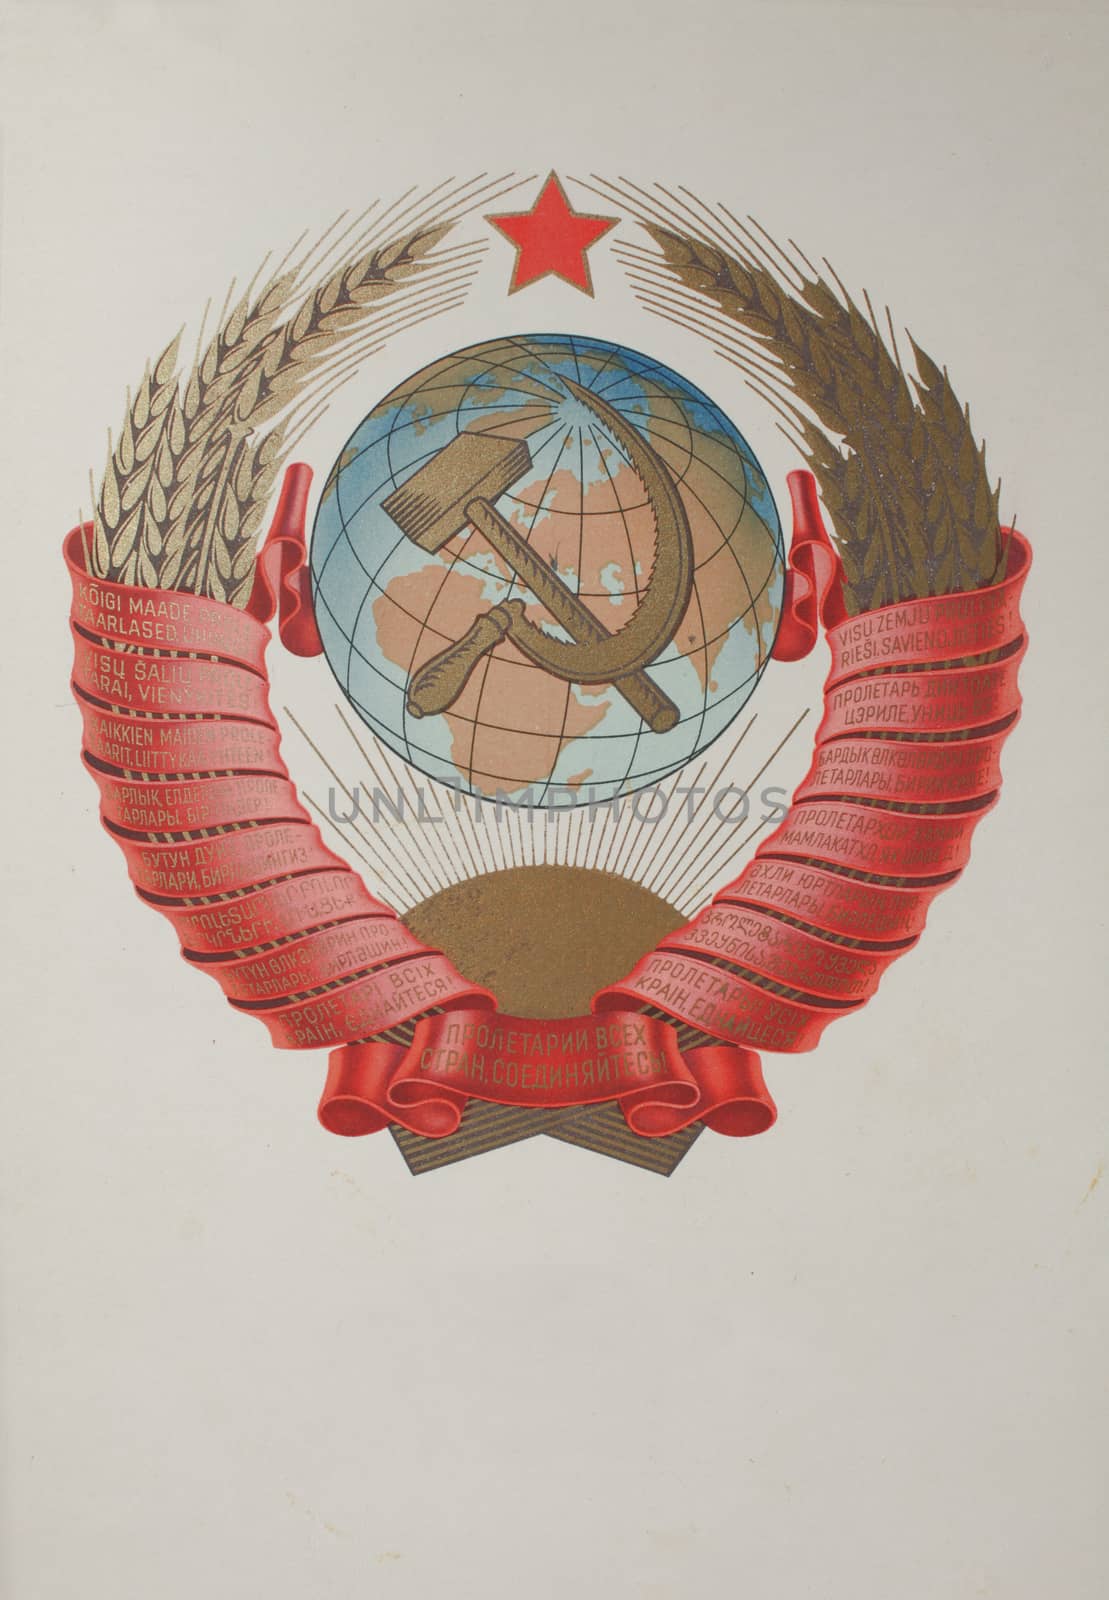 Coat of arms of the Soviet Union by mrivserg